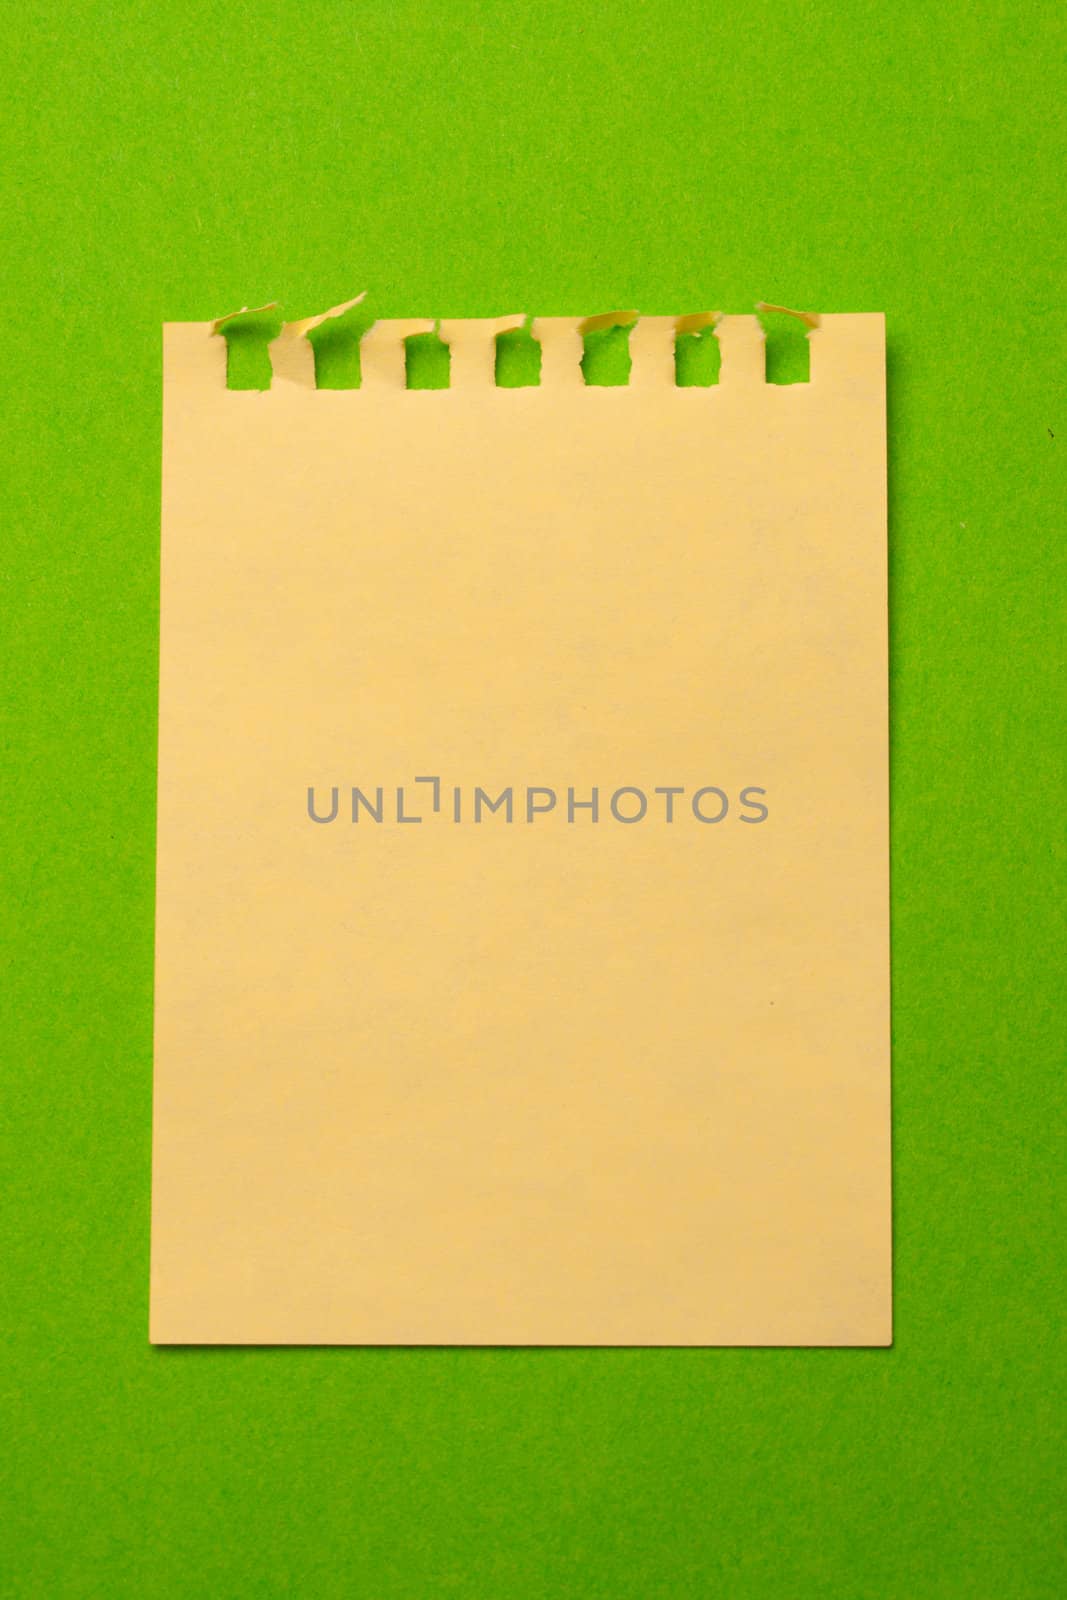 Sheet isolated on green